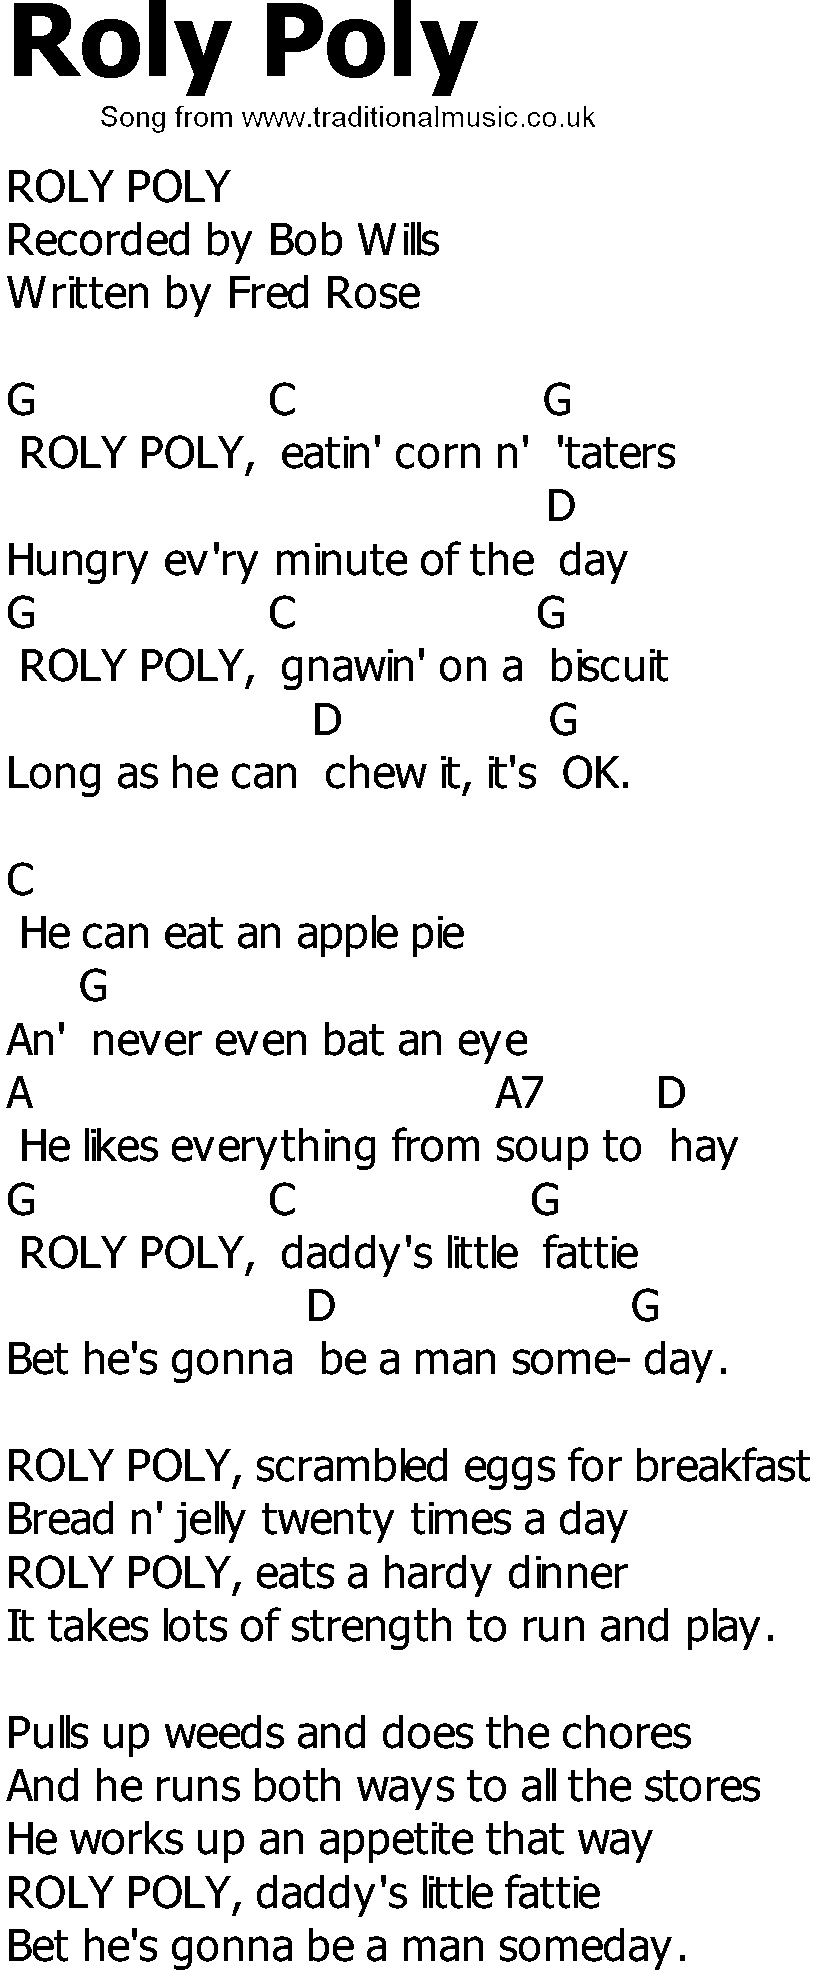 Old Country song lyrics with chords - Roly Poly